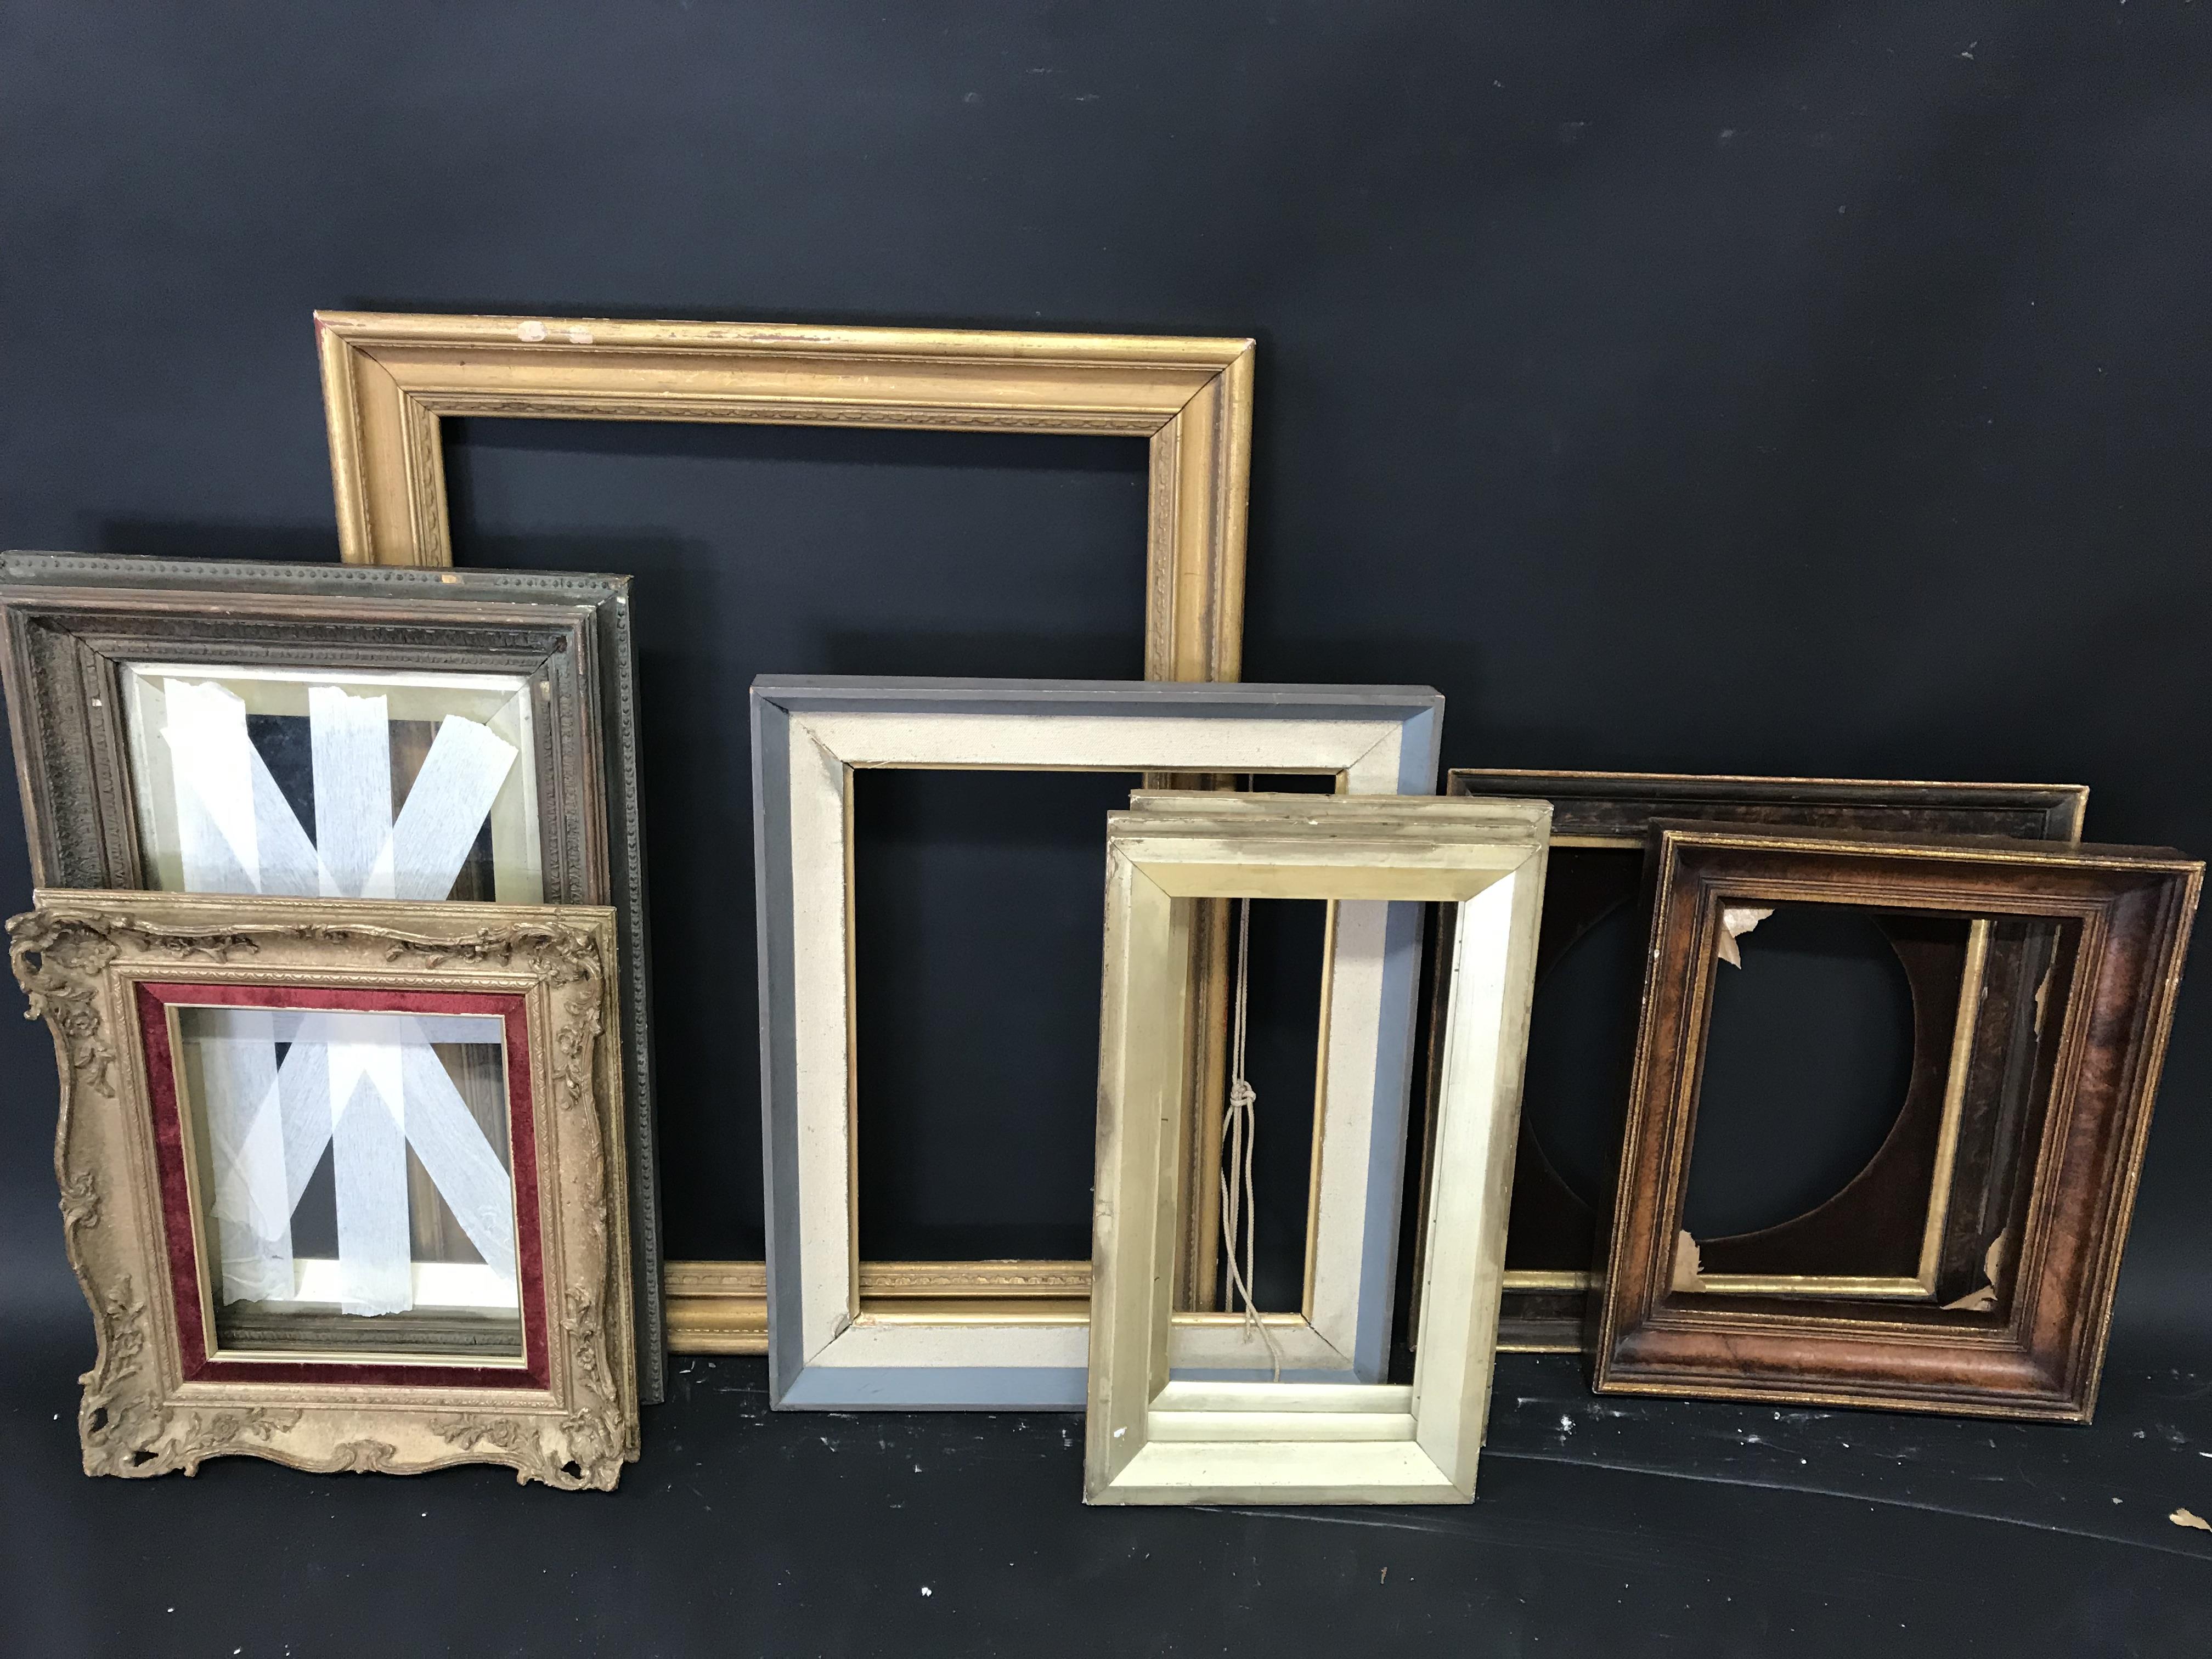 20th Century English School. A Gilt Frame, 24" x 18" (rebate), together with five frames and three